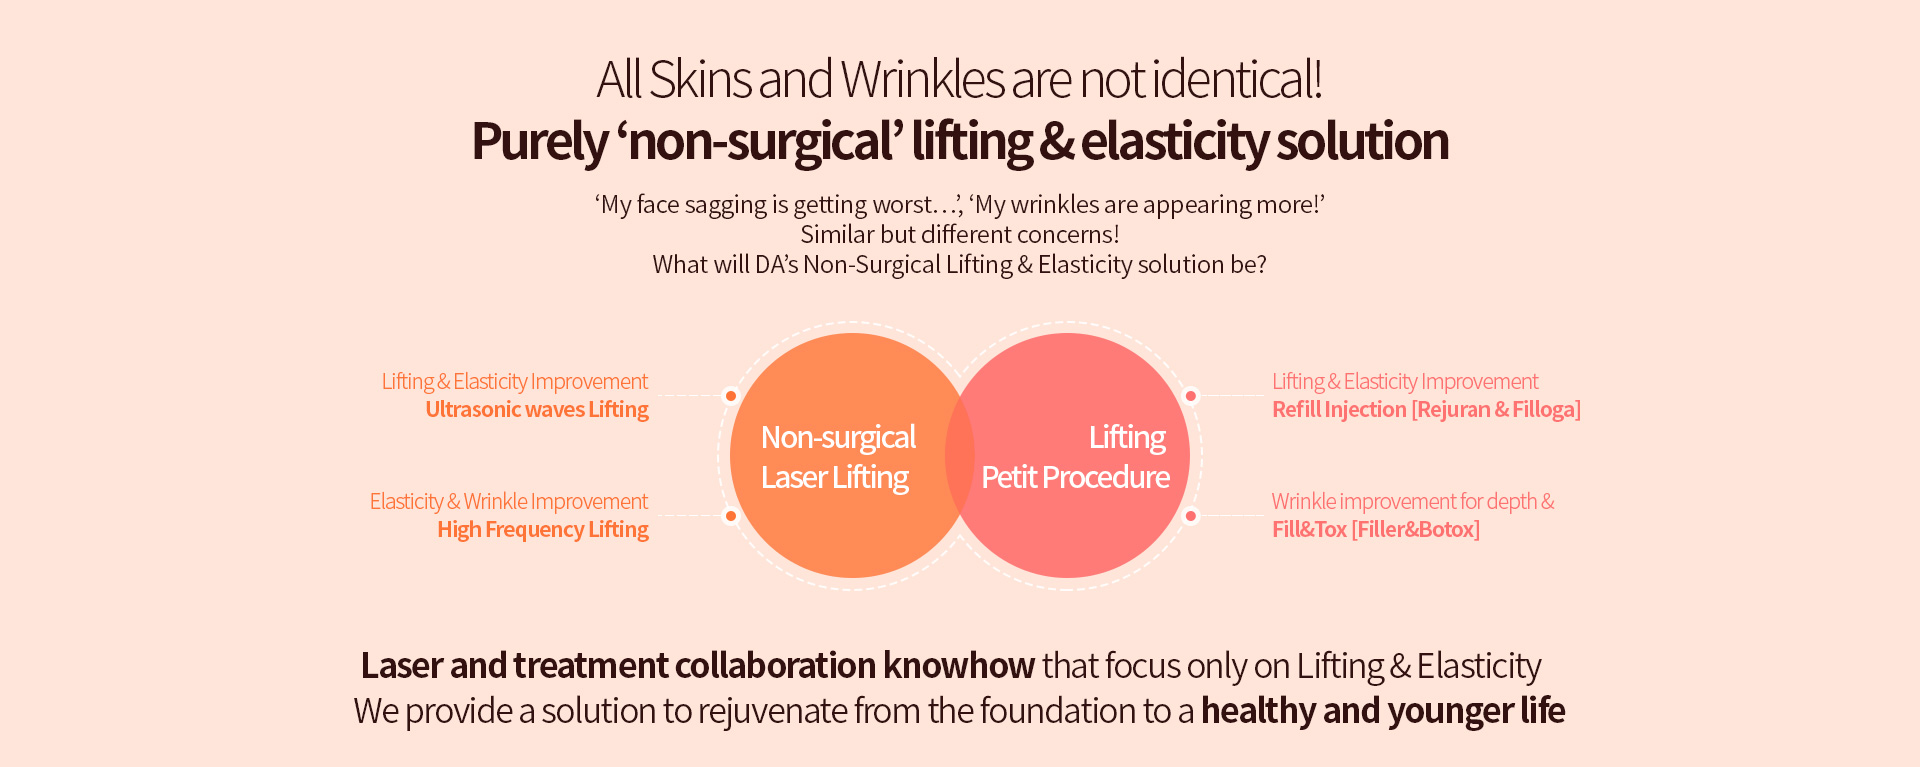 All Skins and Wrinkles are not identical! Purely ‘non-surgical’ lifting and elasticity solution